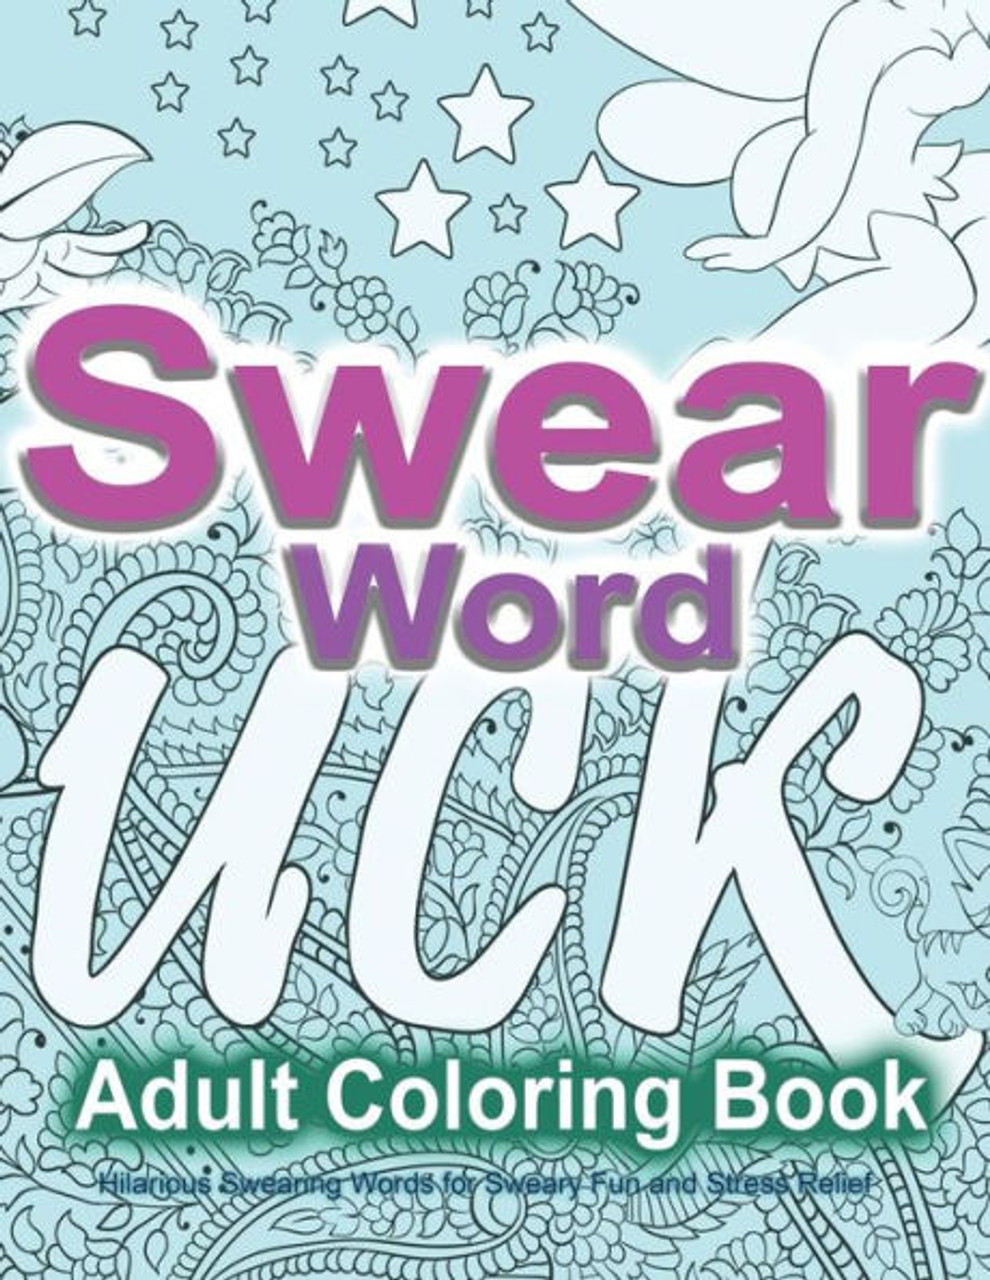 swearing coloring book for adults: Motivational Swear Words Coloring Book  Pages for Stress Relief